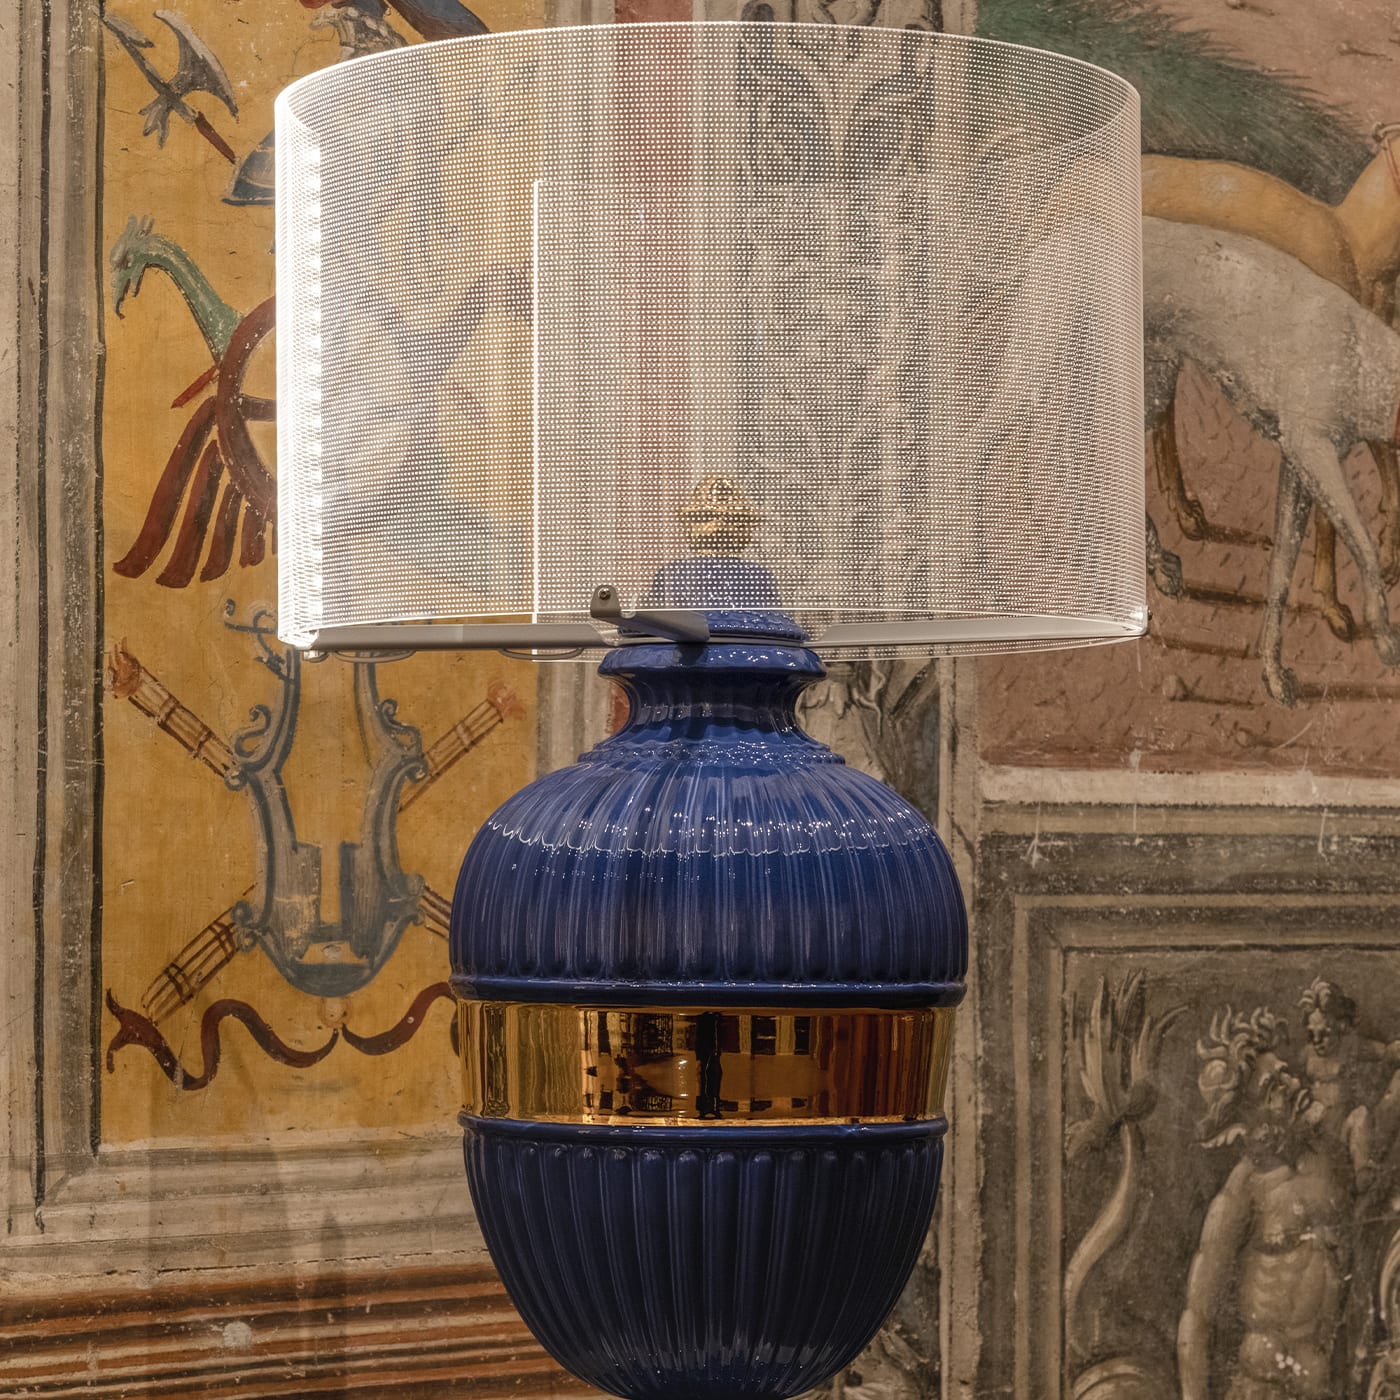 Psyche Blue and Gold Table Lamp - Les First